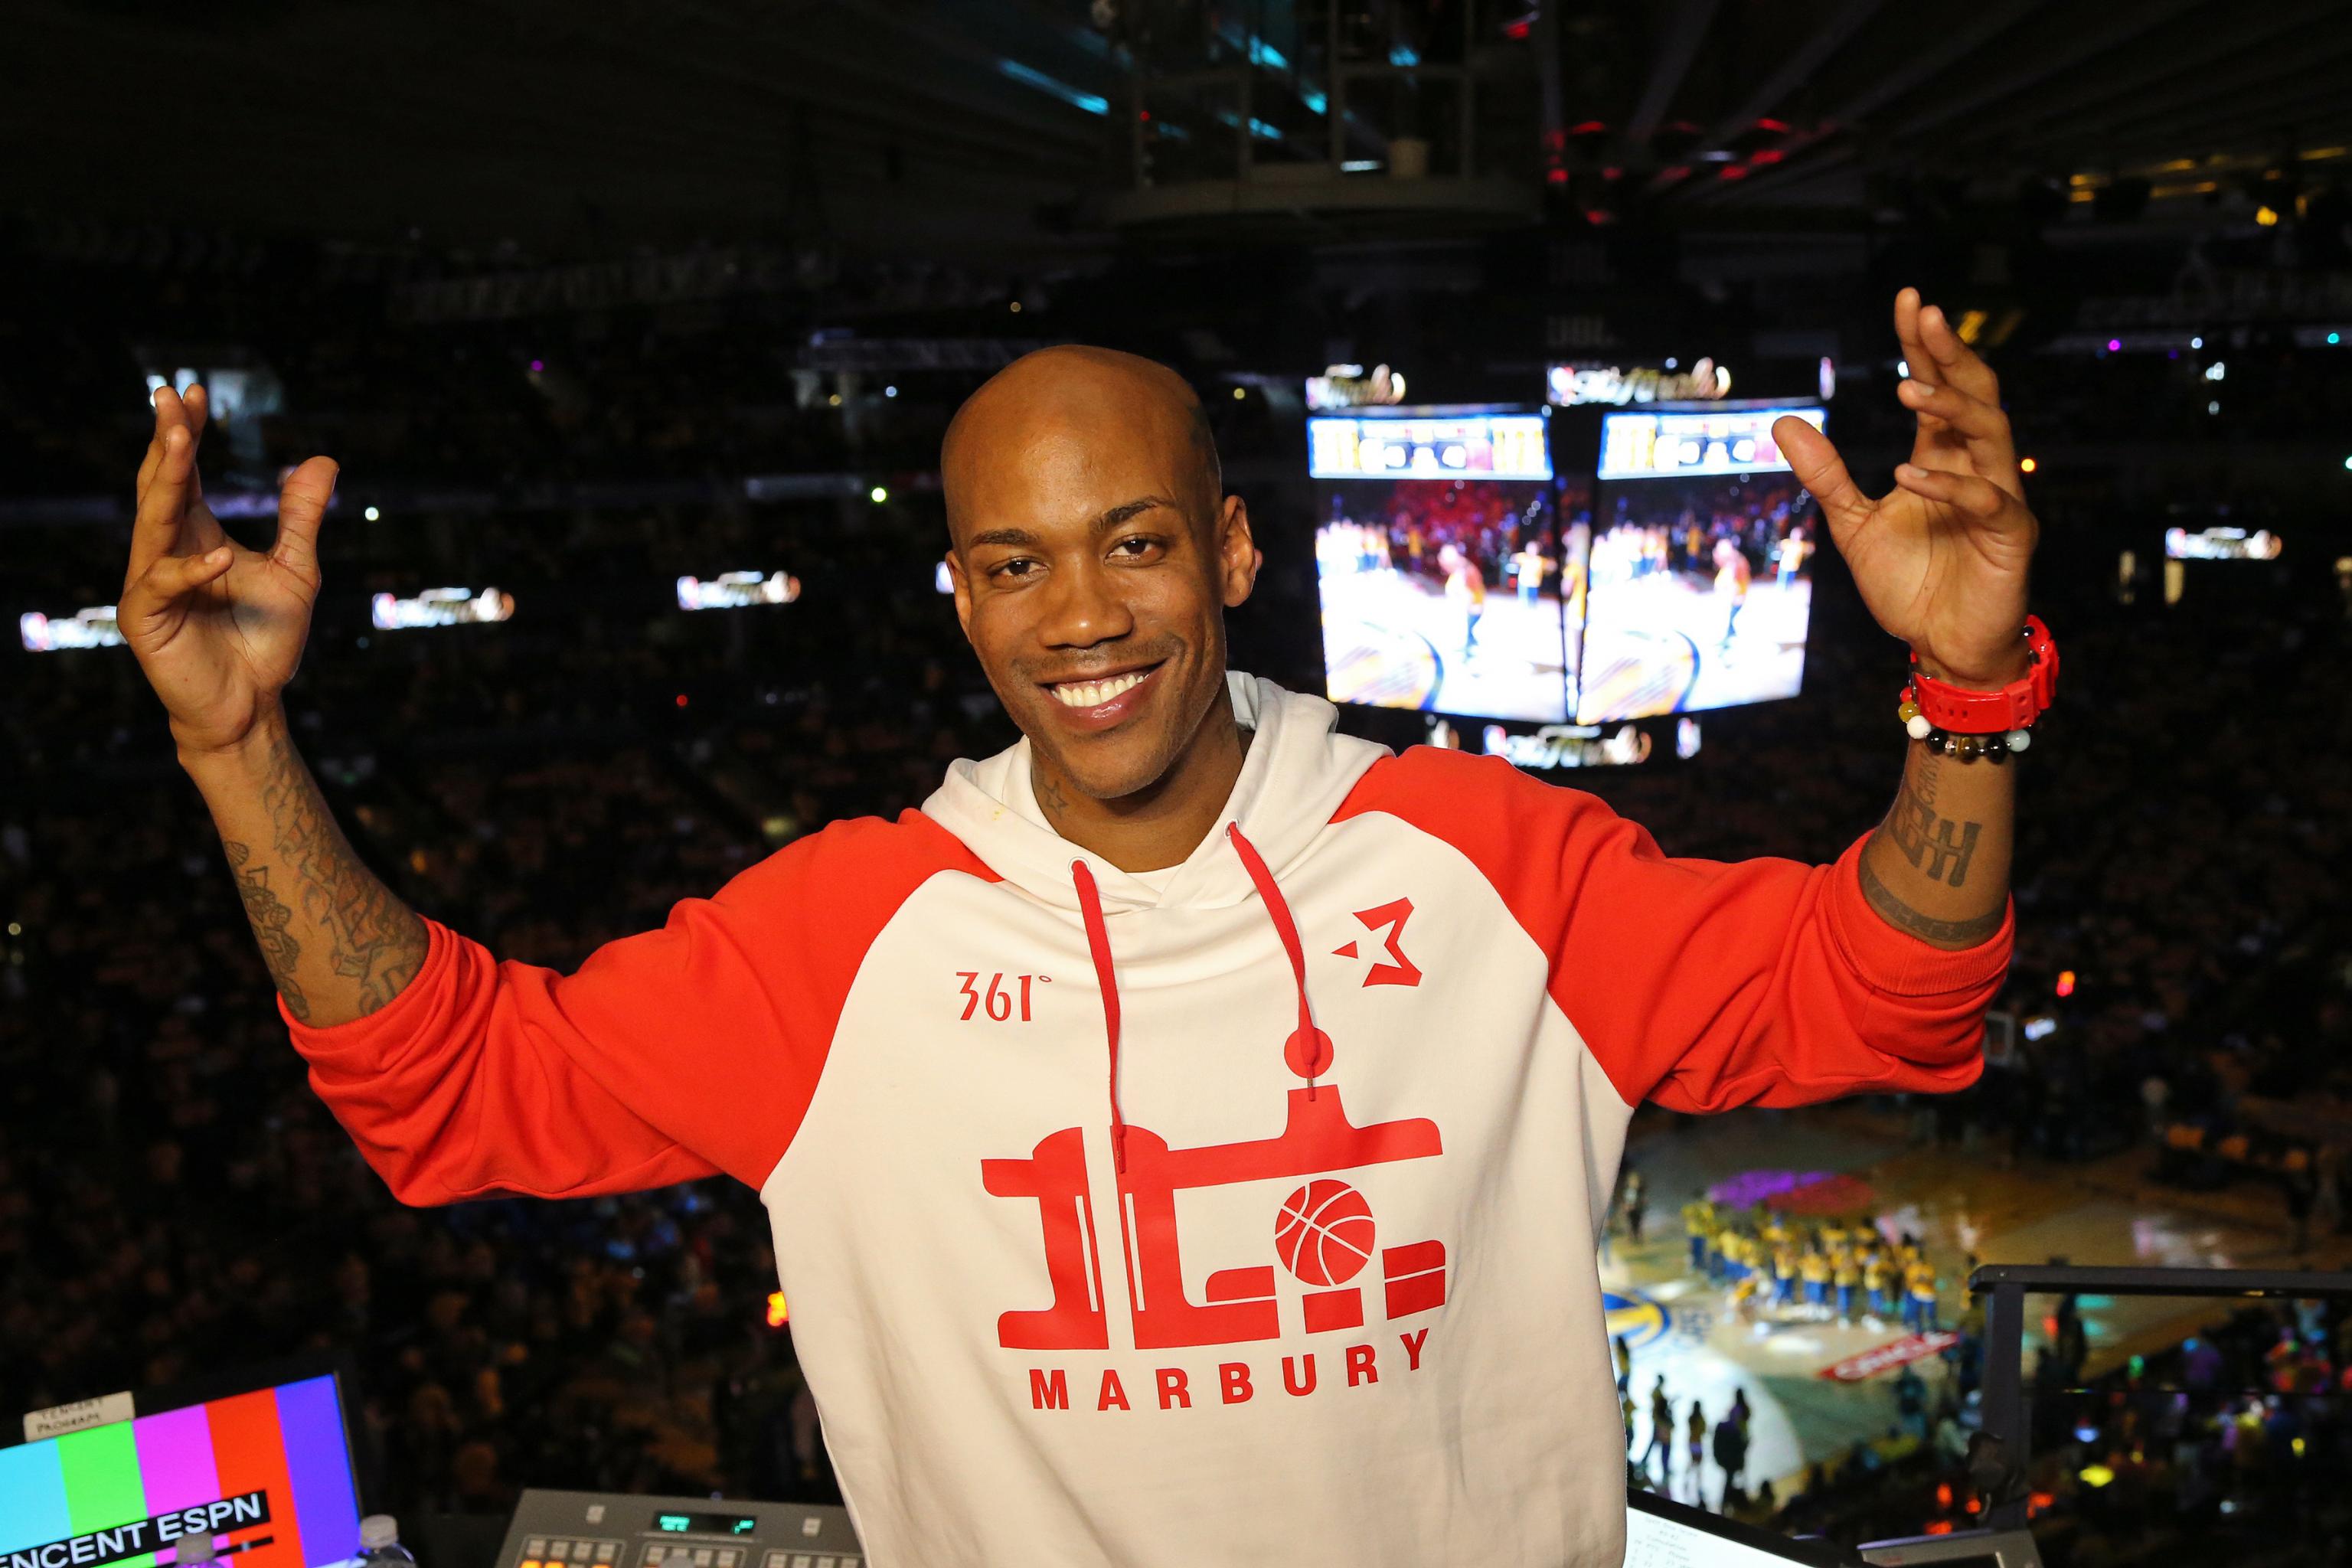 NBA Buzz - Shoutout to the legend Stephon Marbury for